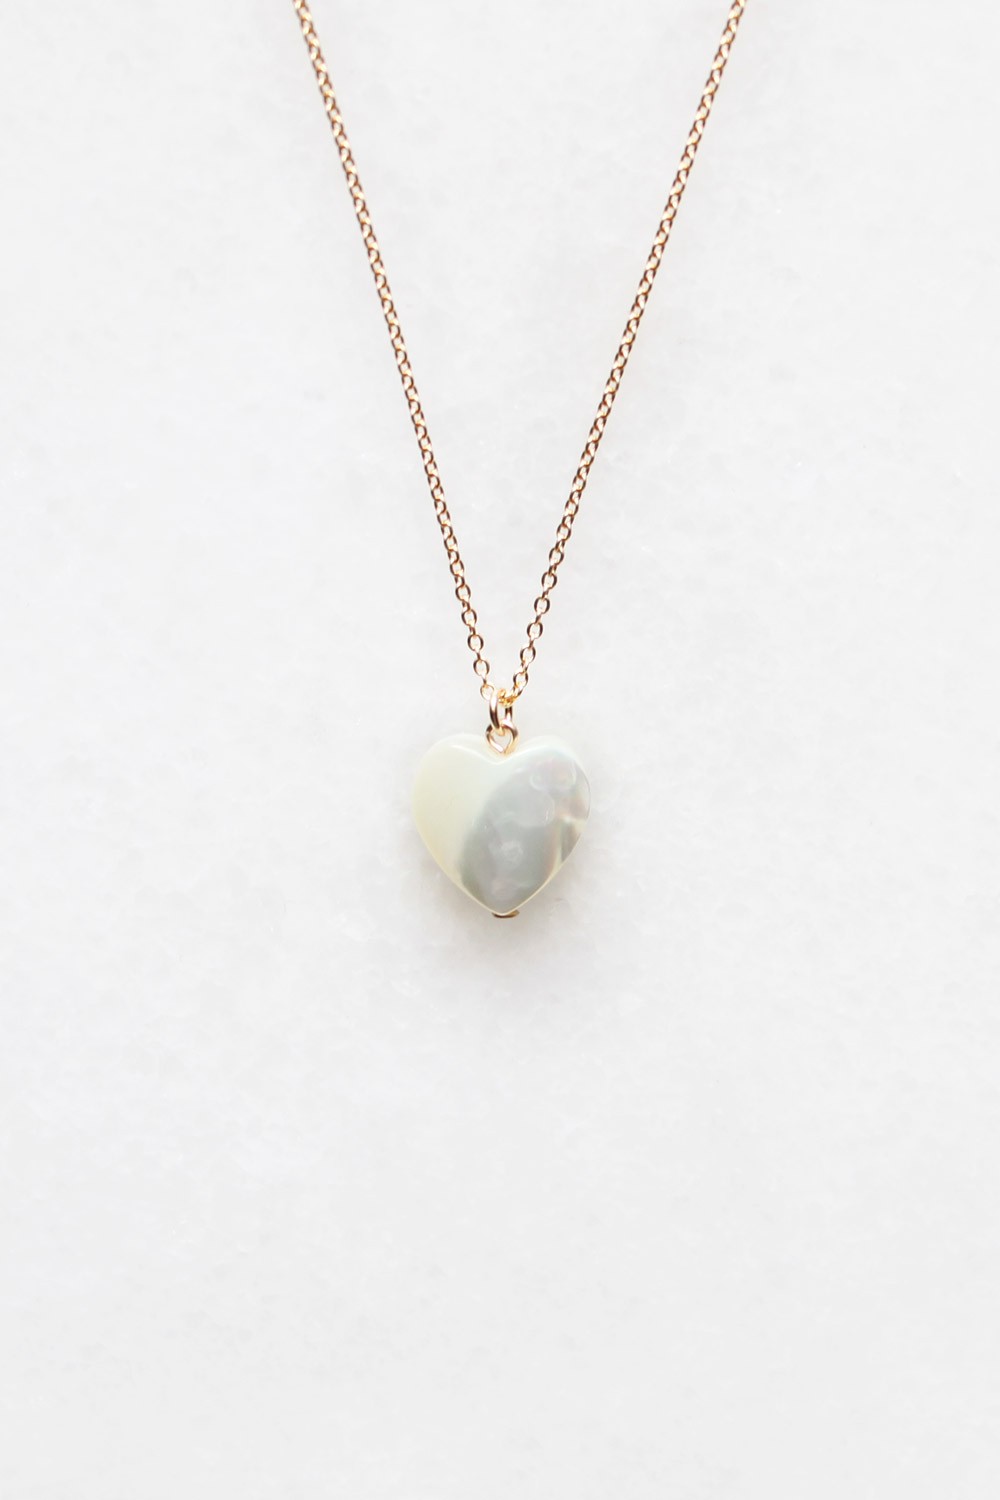 Mother of Pearl Heart Necklace - 14kt gold fill | The Vamoose